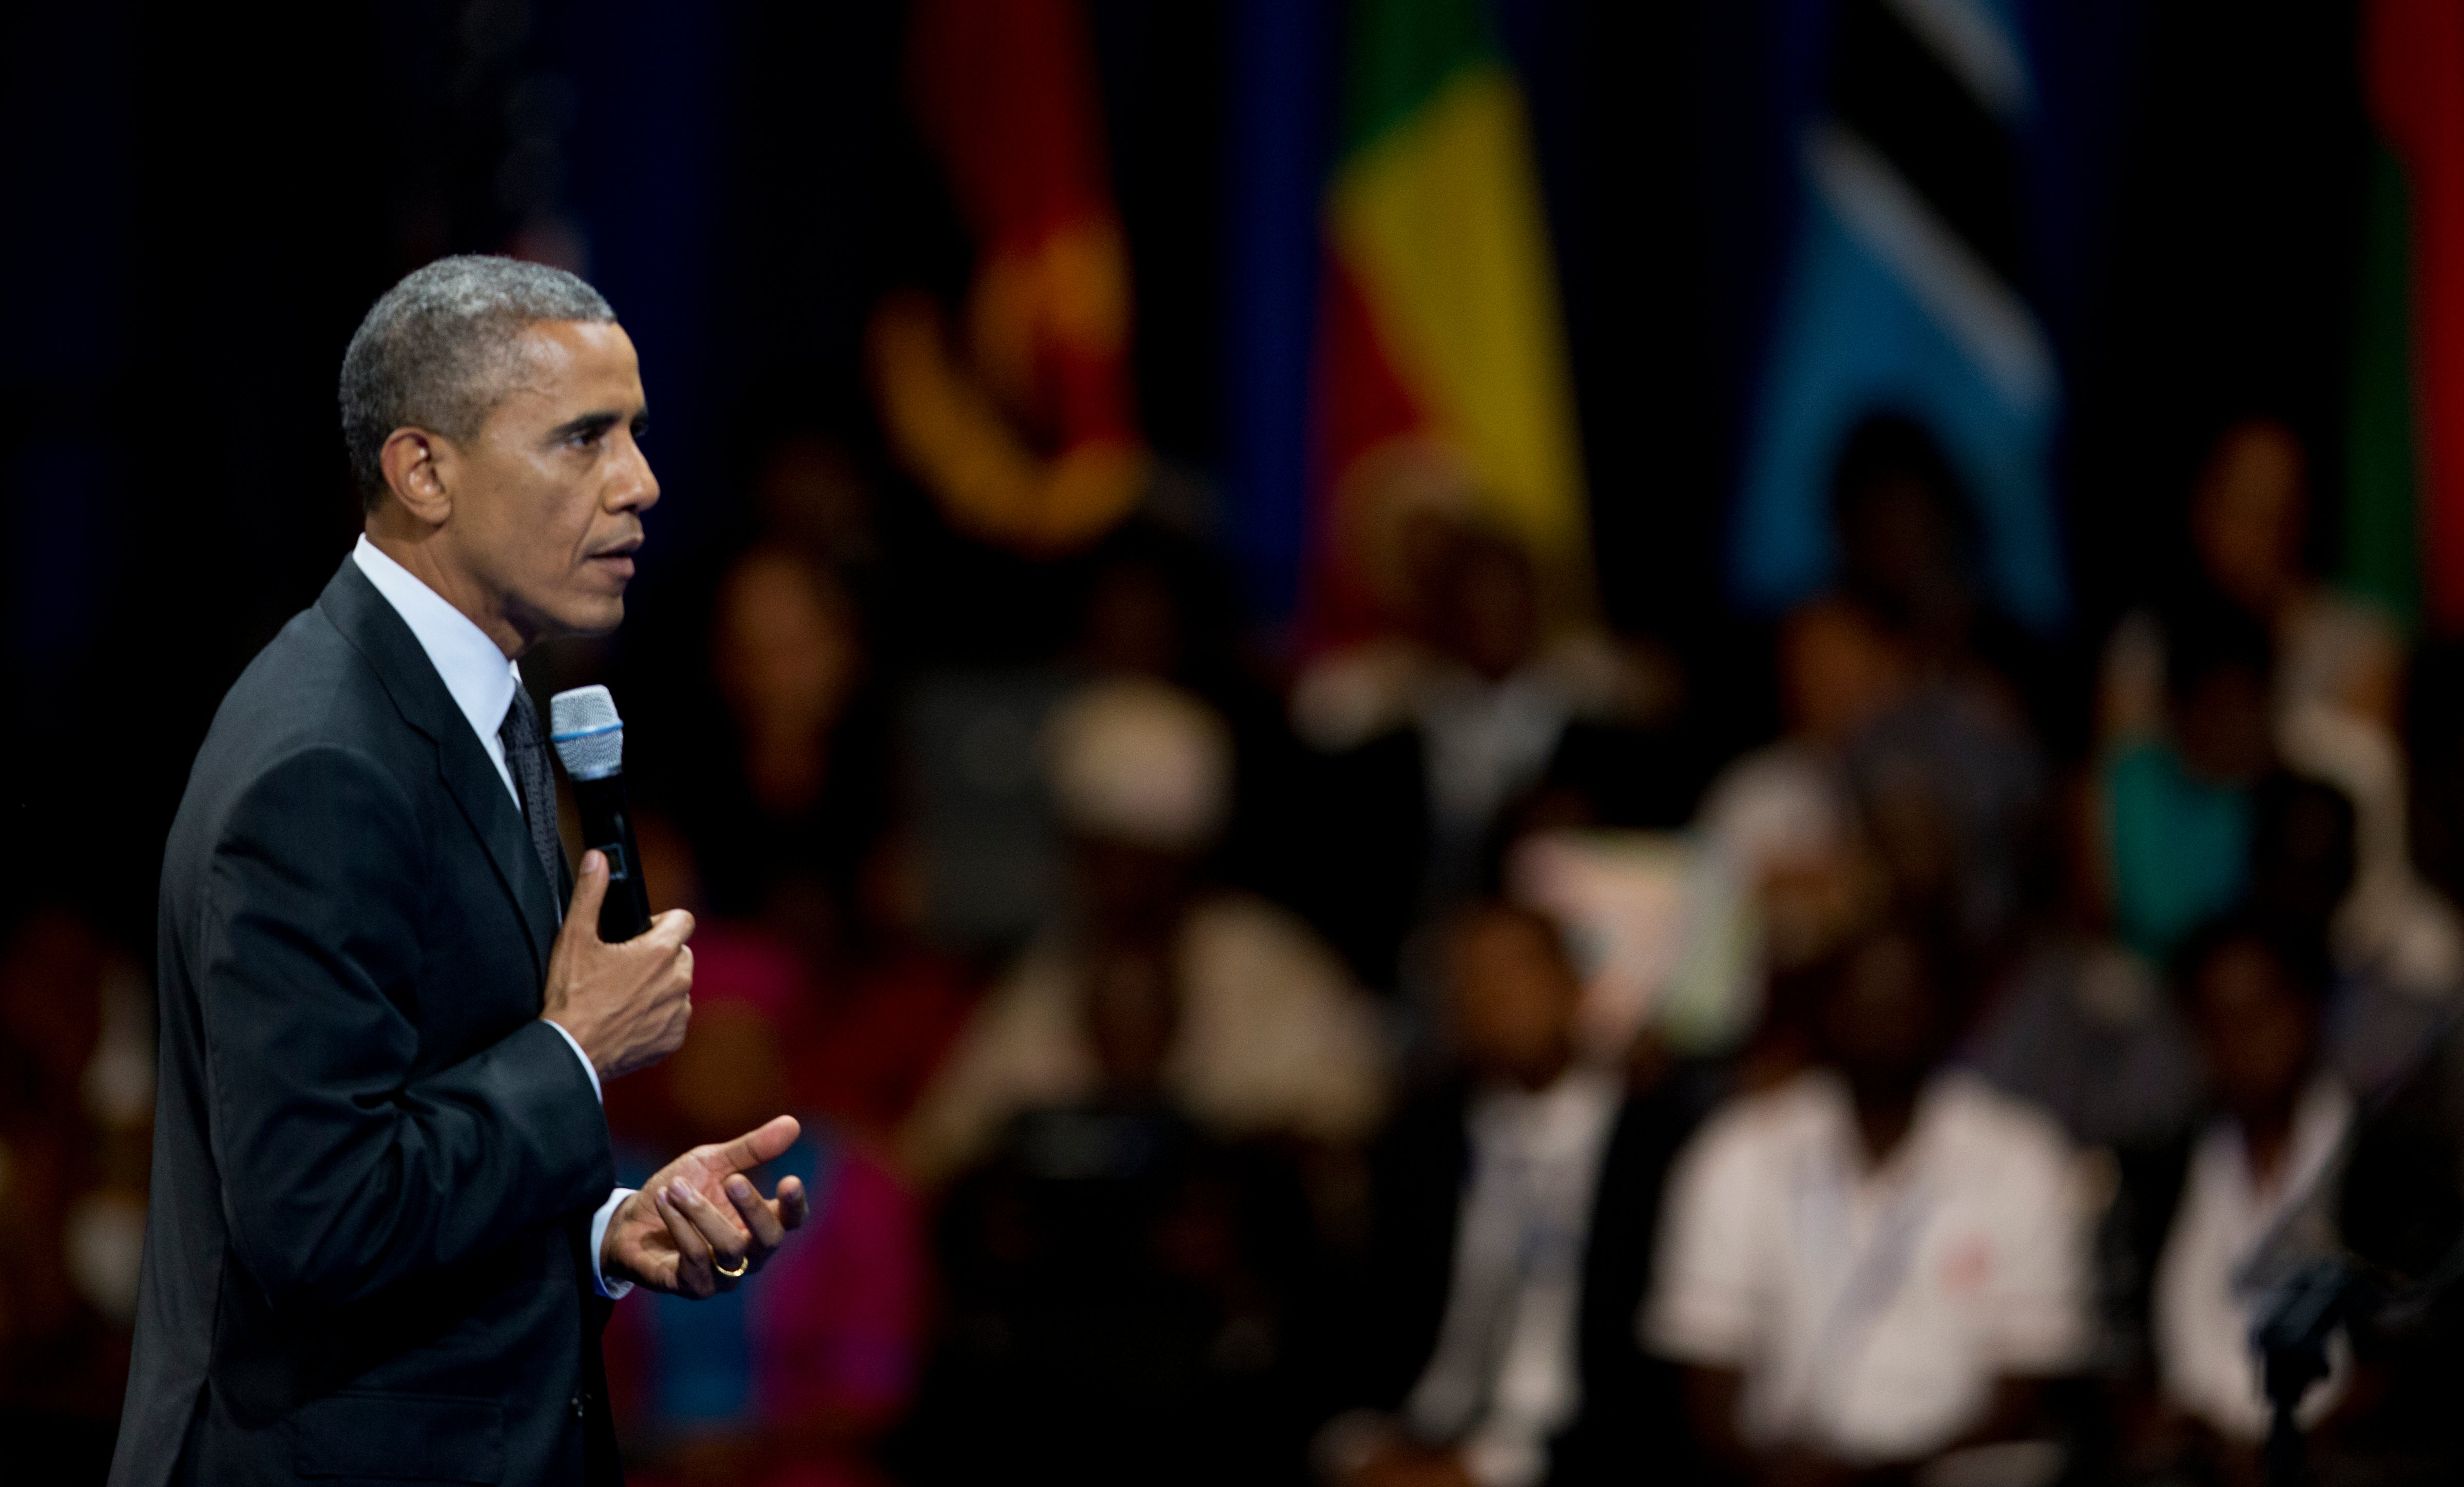 President Barack Obama speaks to participants of the Presidential Summit for the Washington Fellowship for Young African Leaders in Washington on July 28, 2014.